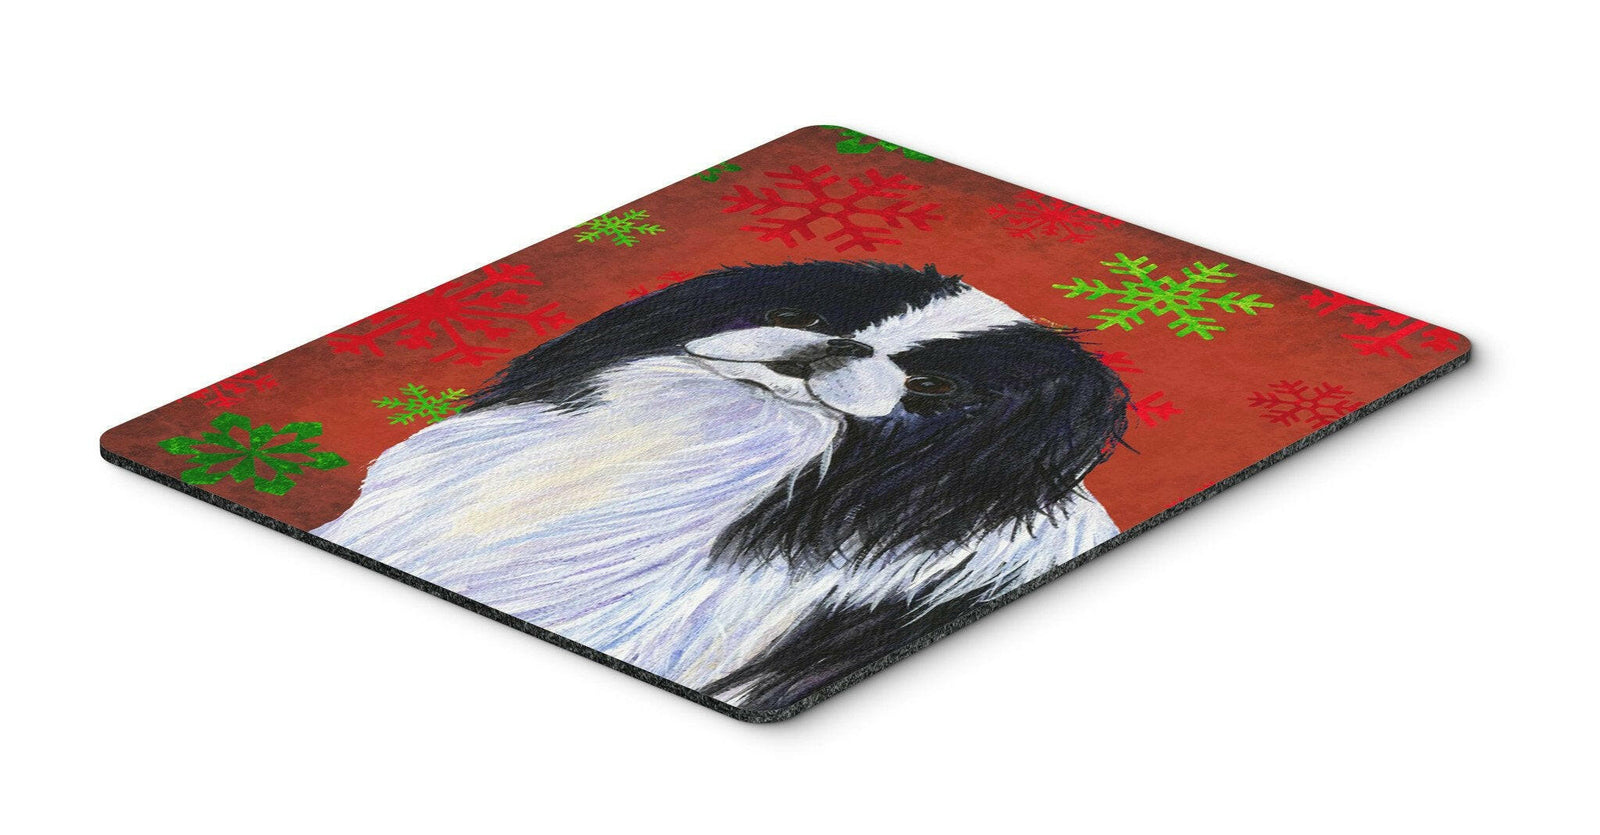 Japanese Chin Red and Green Snowflakes Christmas Mouse Pad, Hot Pad or Trivet by Caroline's Treasures